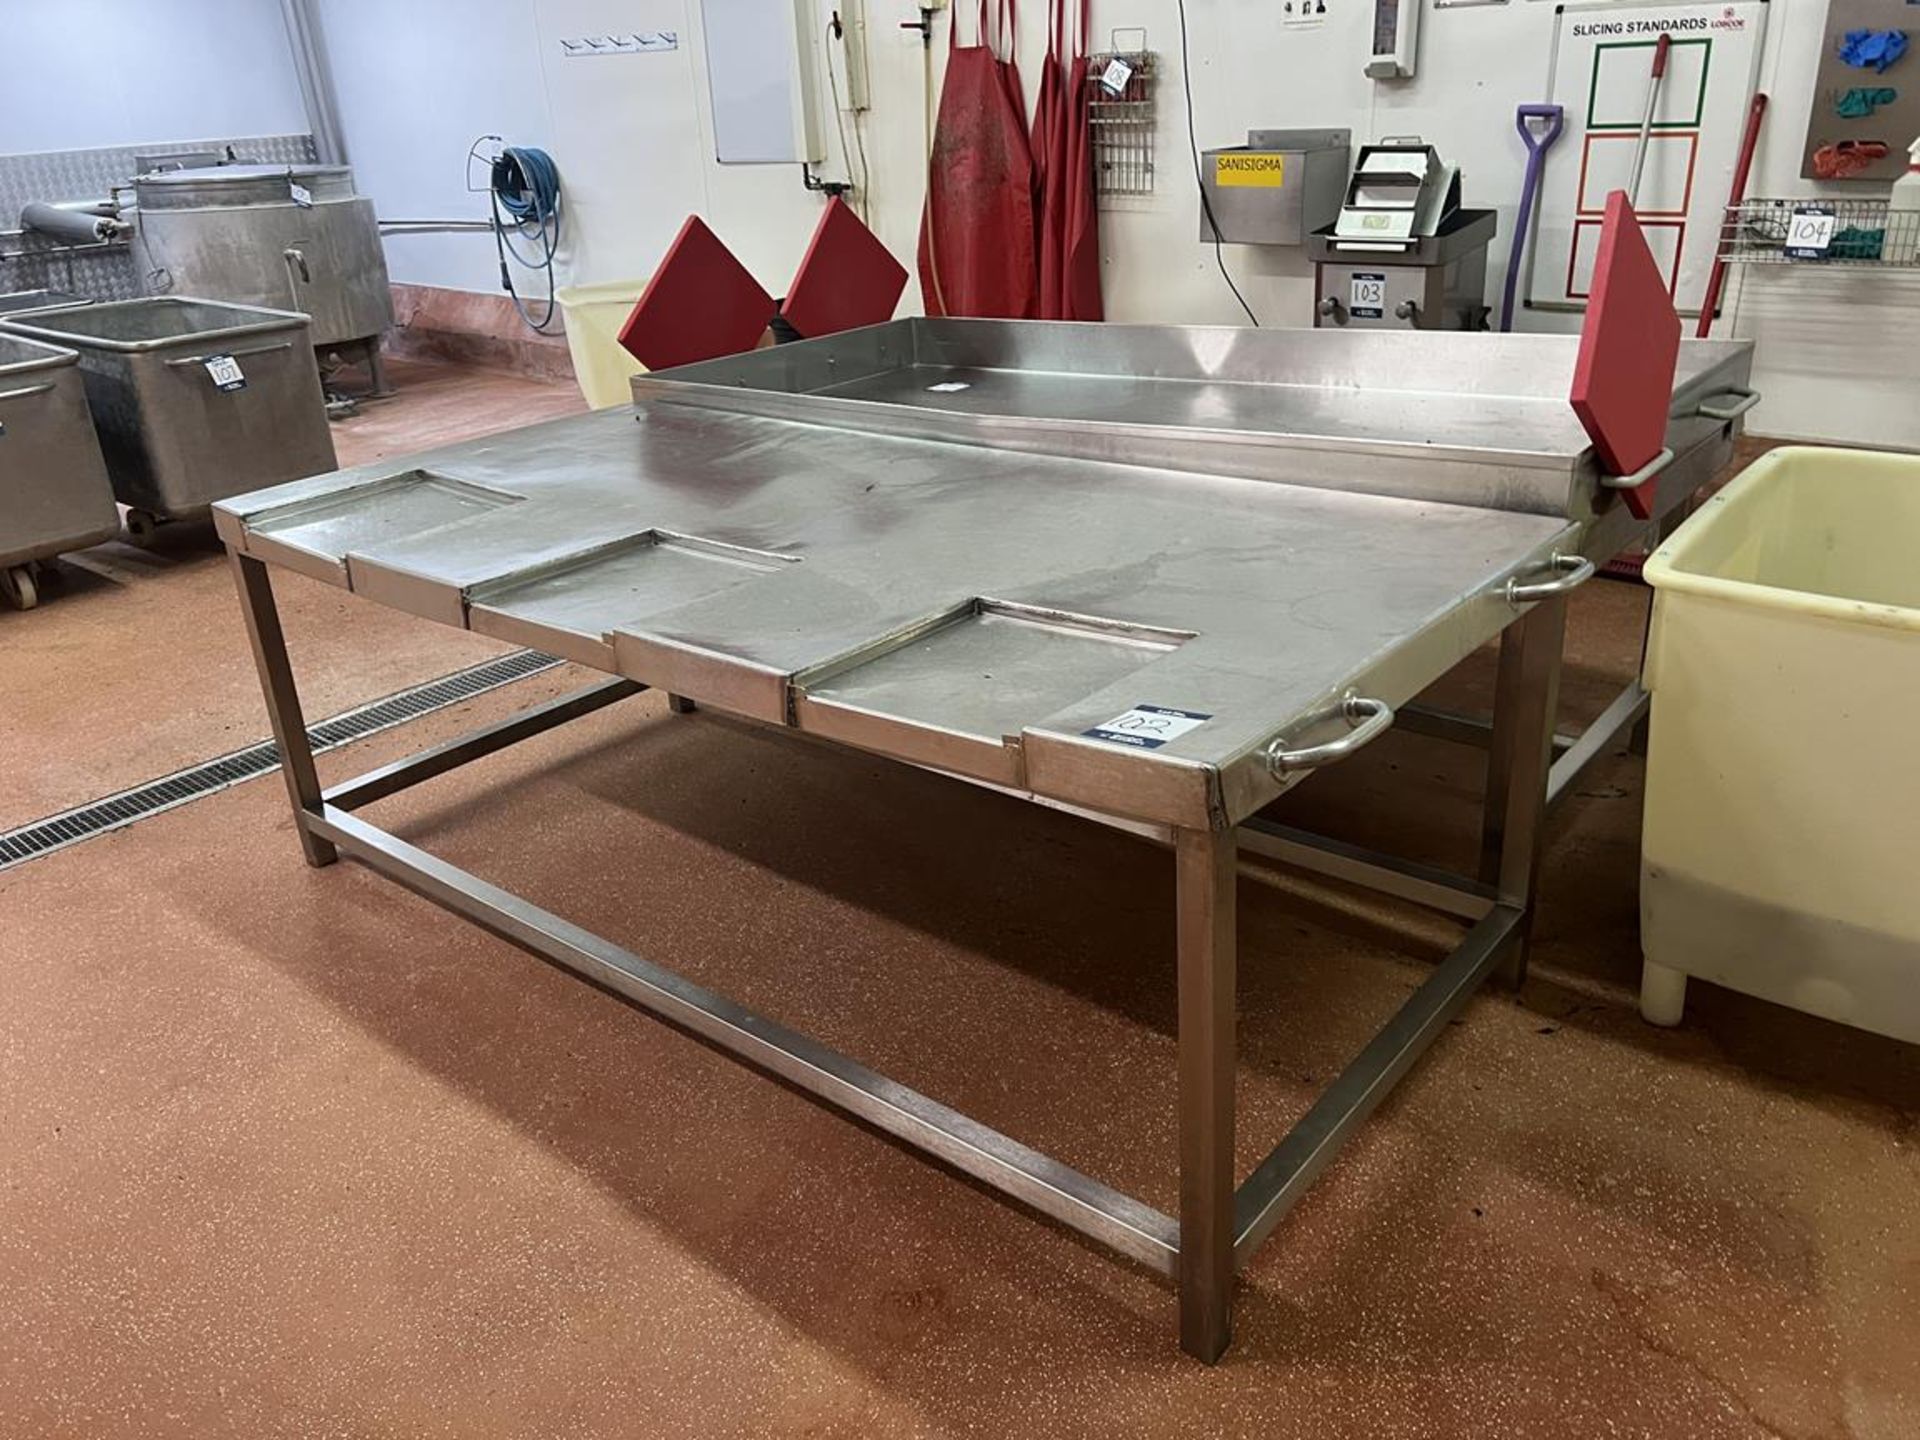 2x (no.) stainless steel cutting tables; 2.35m x 1.1m and 2.38m x 1.12m - Image 4 of 8